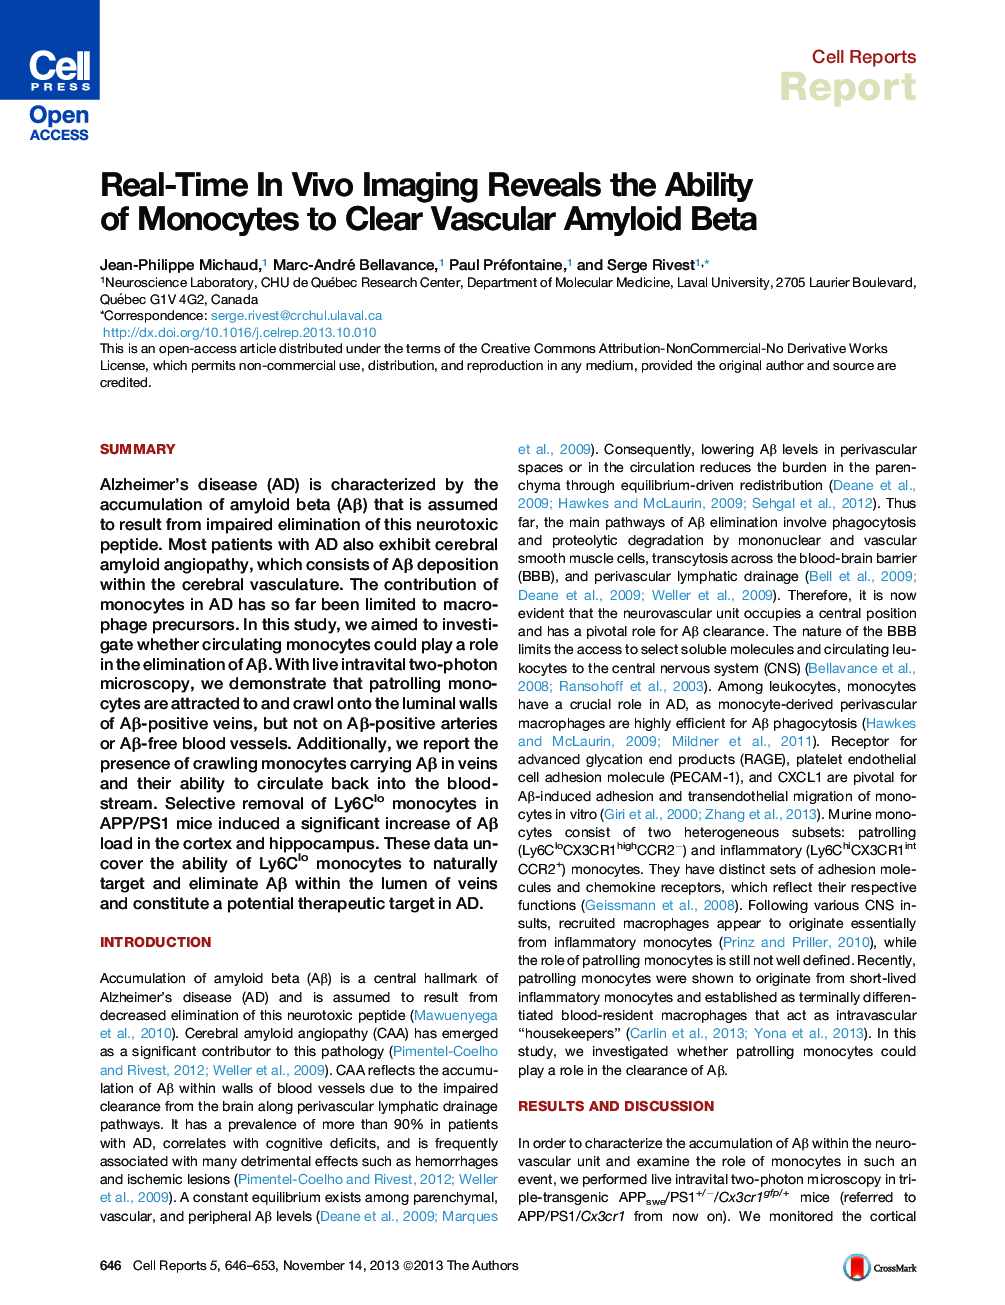 Real-Time In Vivo Imaging Reveals the Ability of Monocytes to Clear Vascular Amyloid Beta 